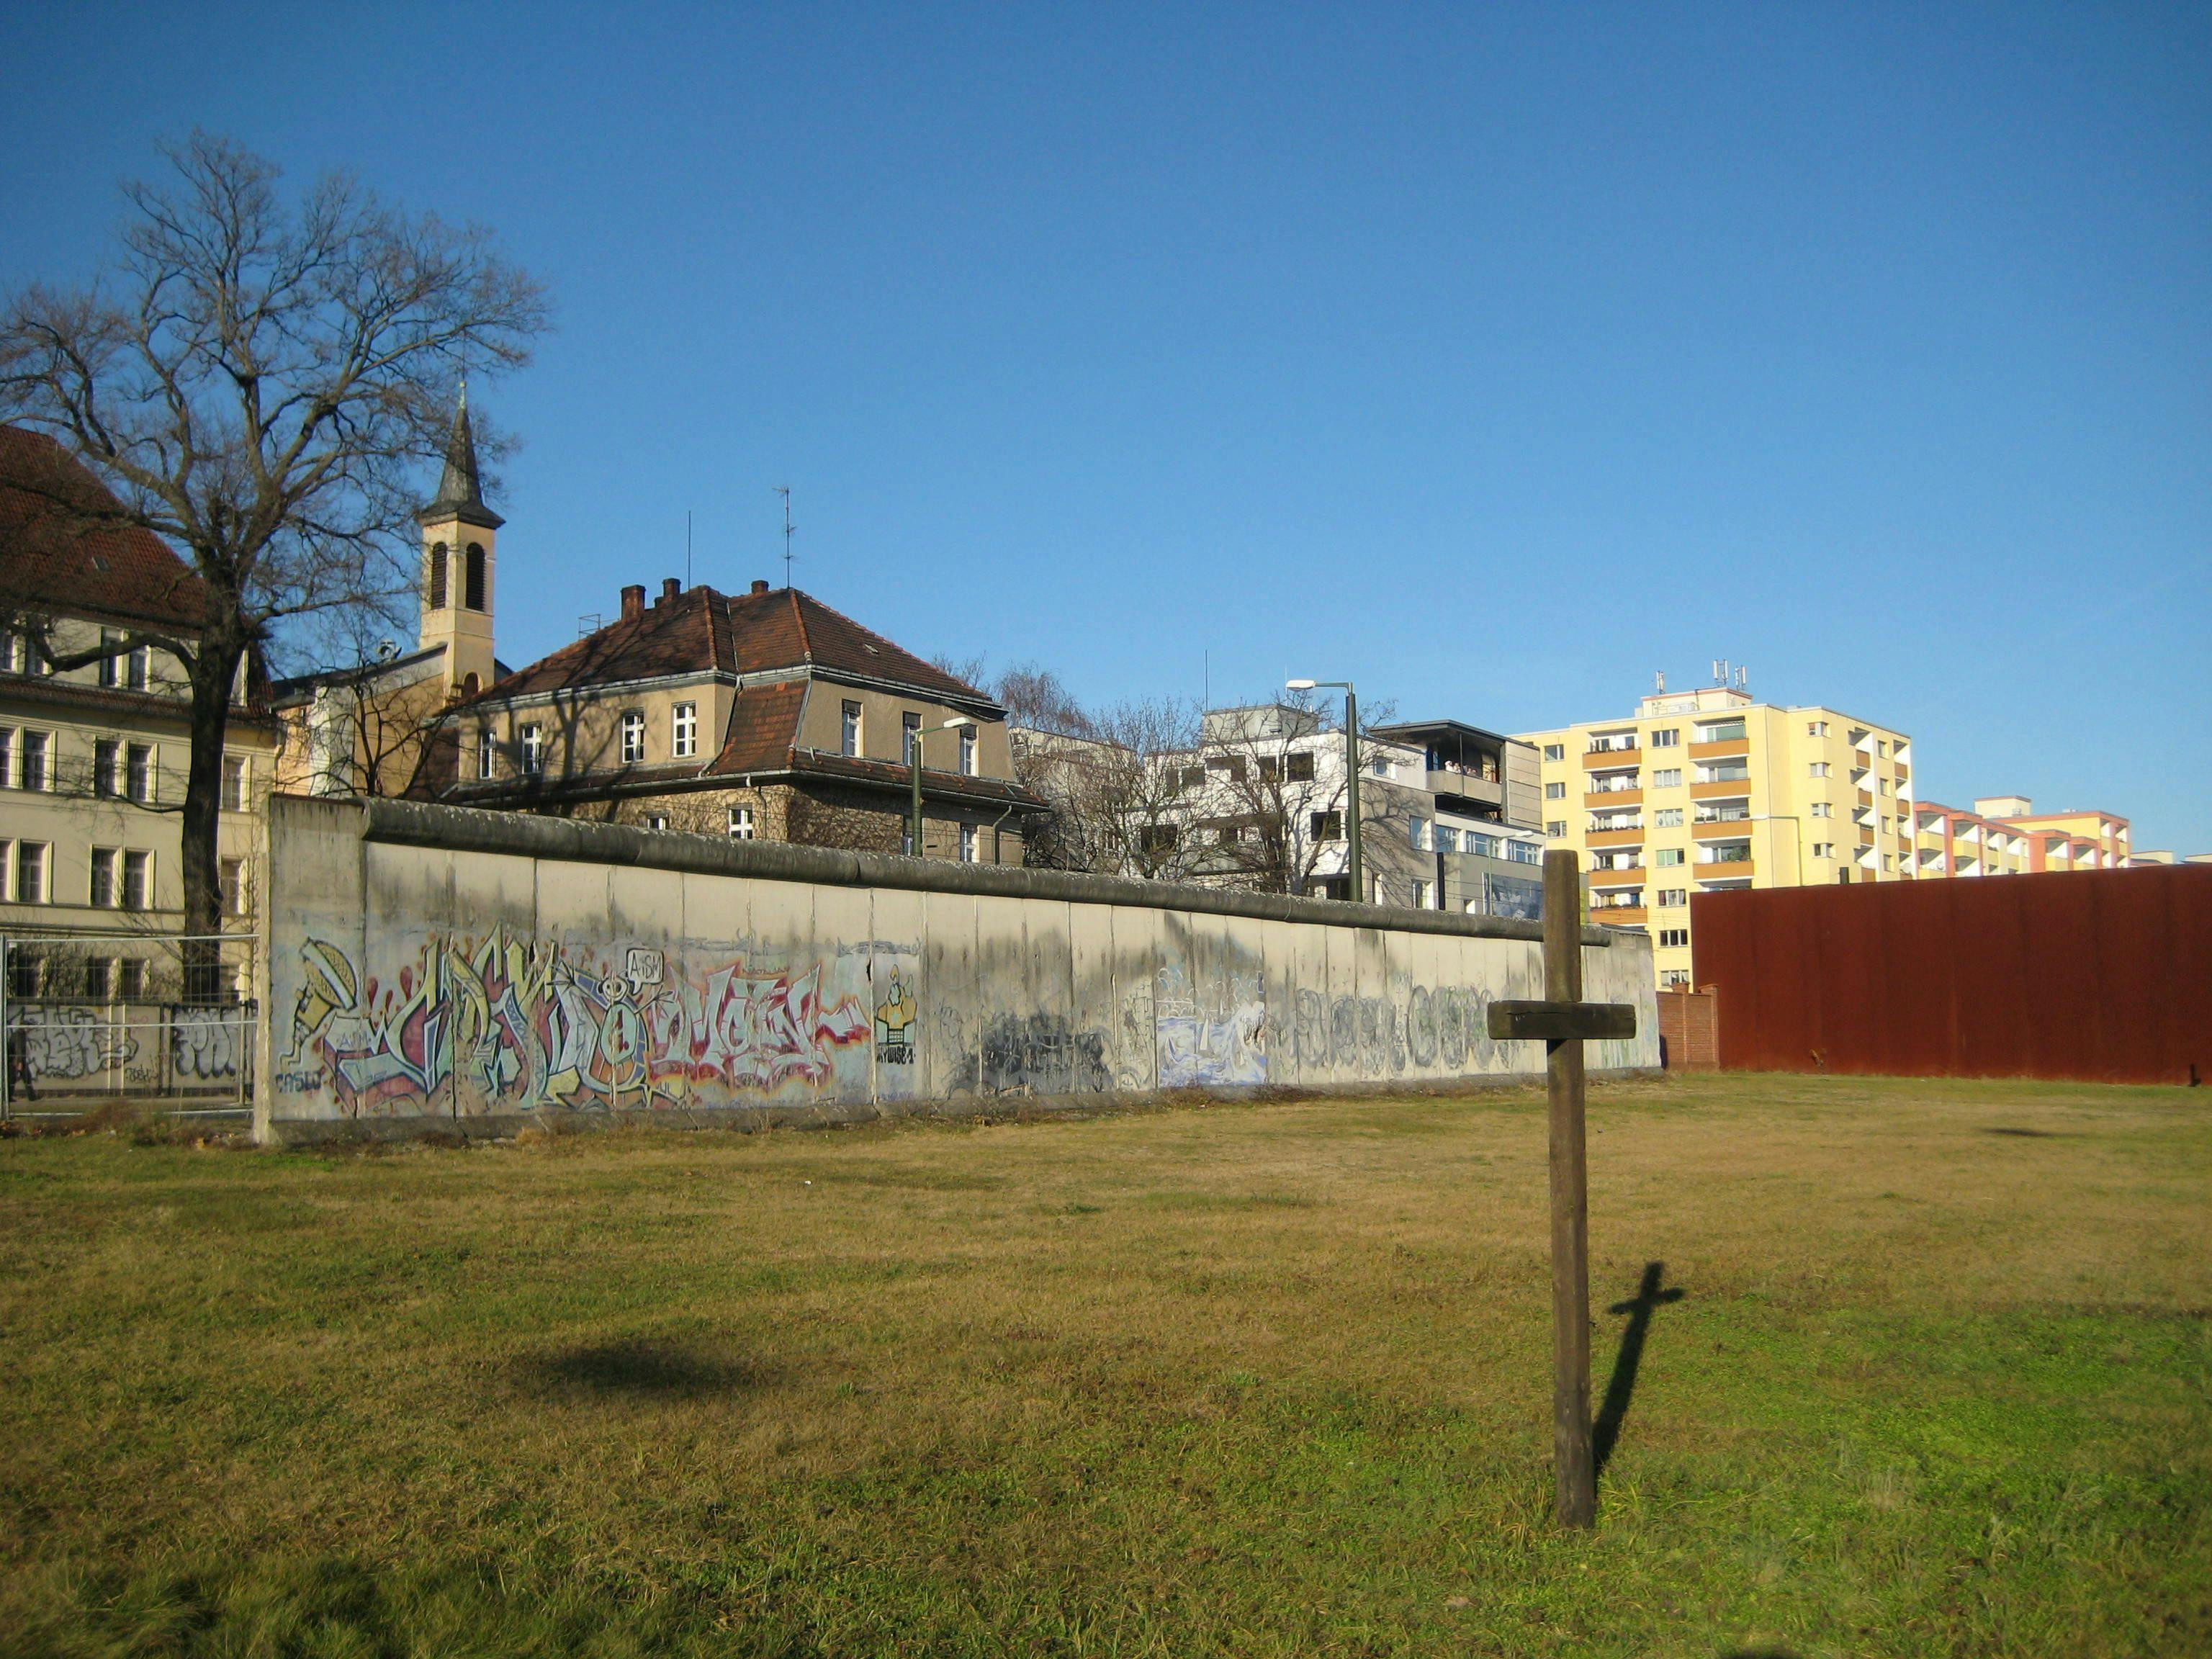 Secrets of the Berlin Wall a self-guided audio walking tour